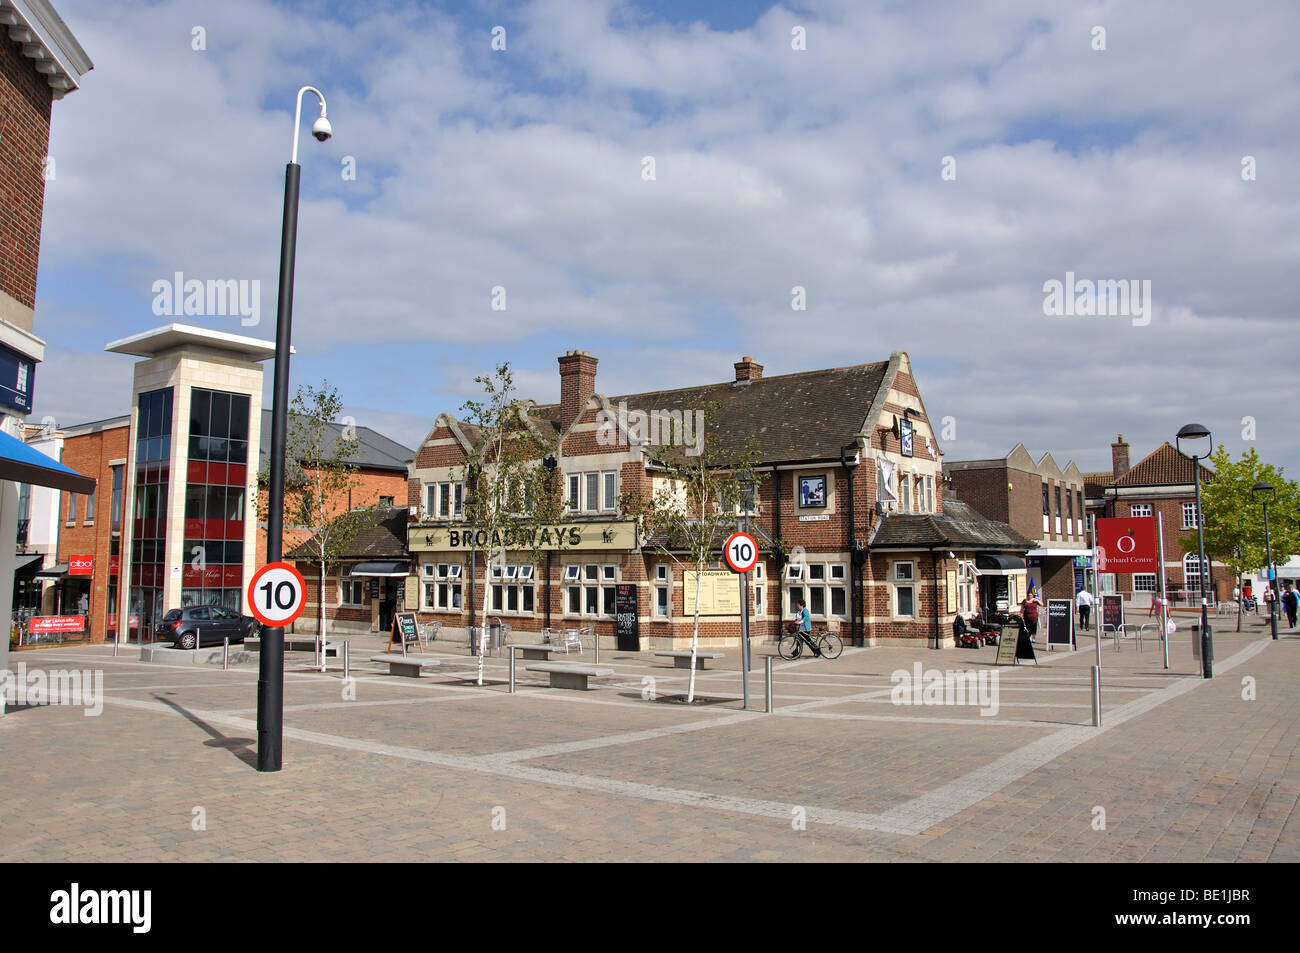 Broadways Pub and Orchard Centre, Broadway, Didcot, Oxfordshire, England, United Kingdom Stock Photo